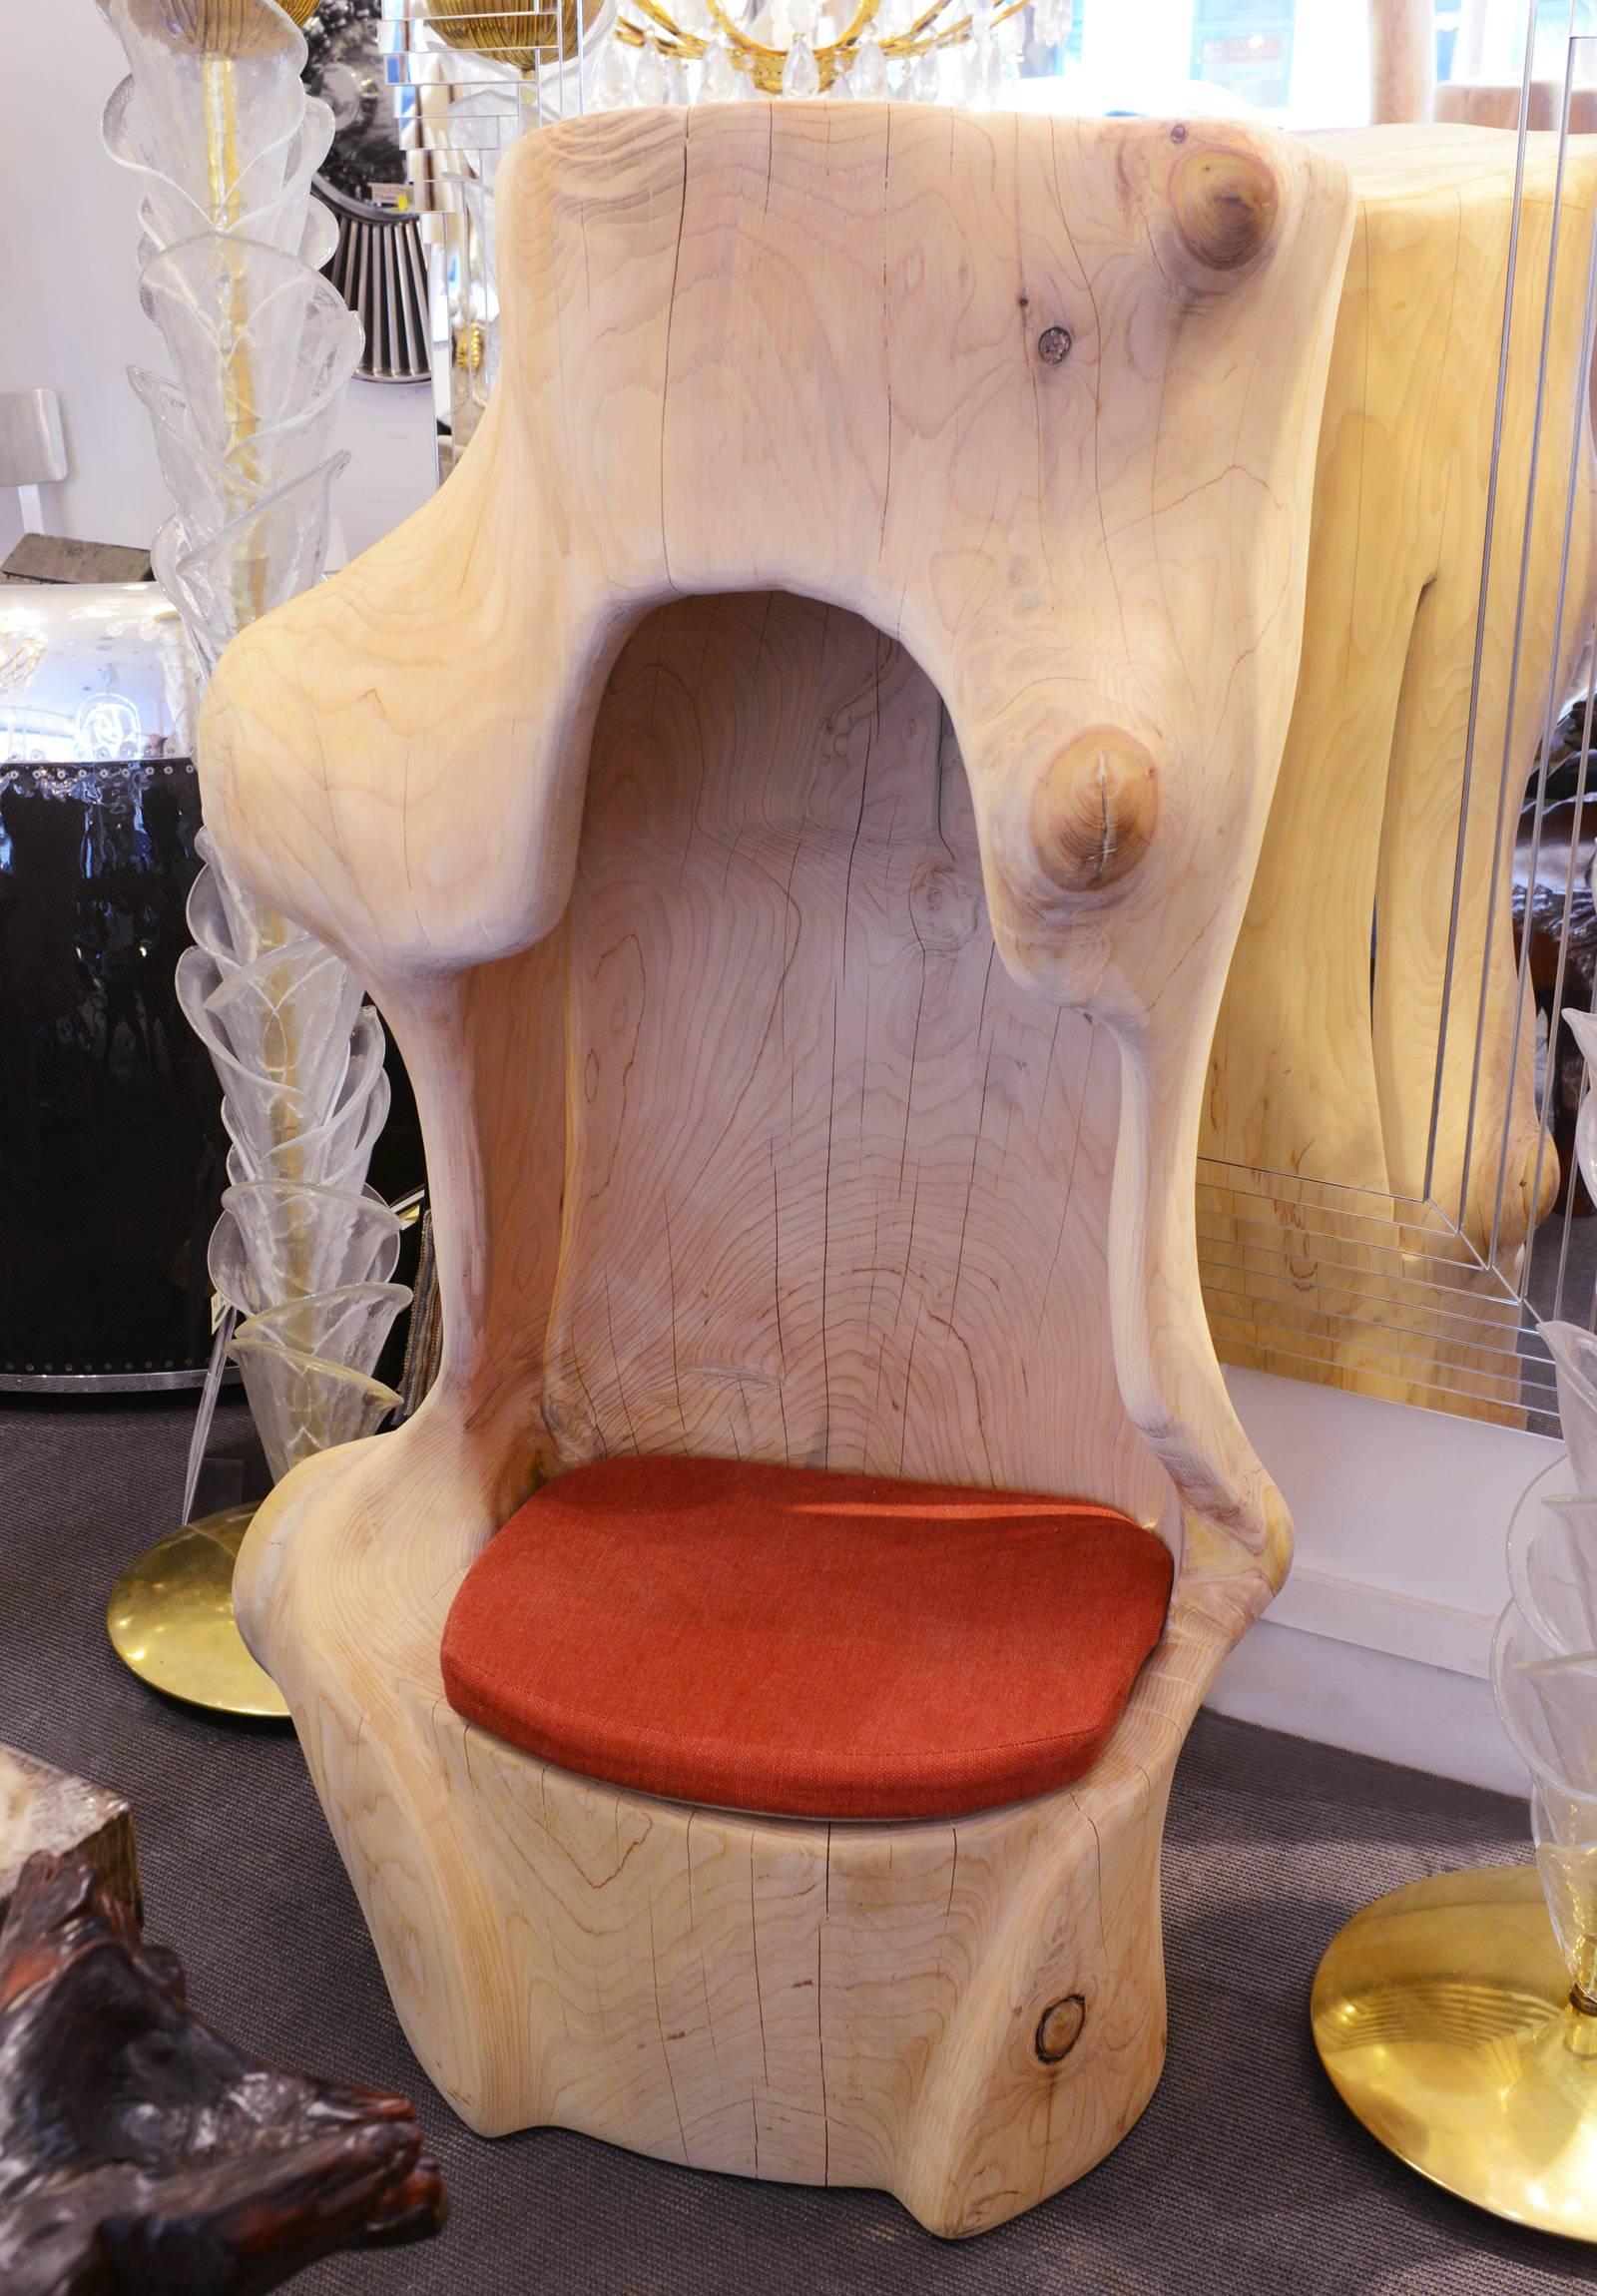 Trone Cedar tree a totally hand-carved with
lebanese solid cedar tree. Made from dead
cedar tree. With coral red cushion seat included.
Made in France in 2018.
Also available in Trone Cedar Tree B.
Exceptional and unique piece.
 